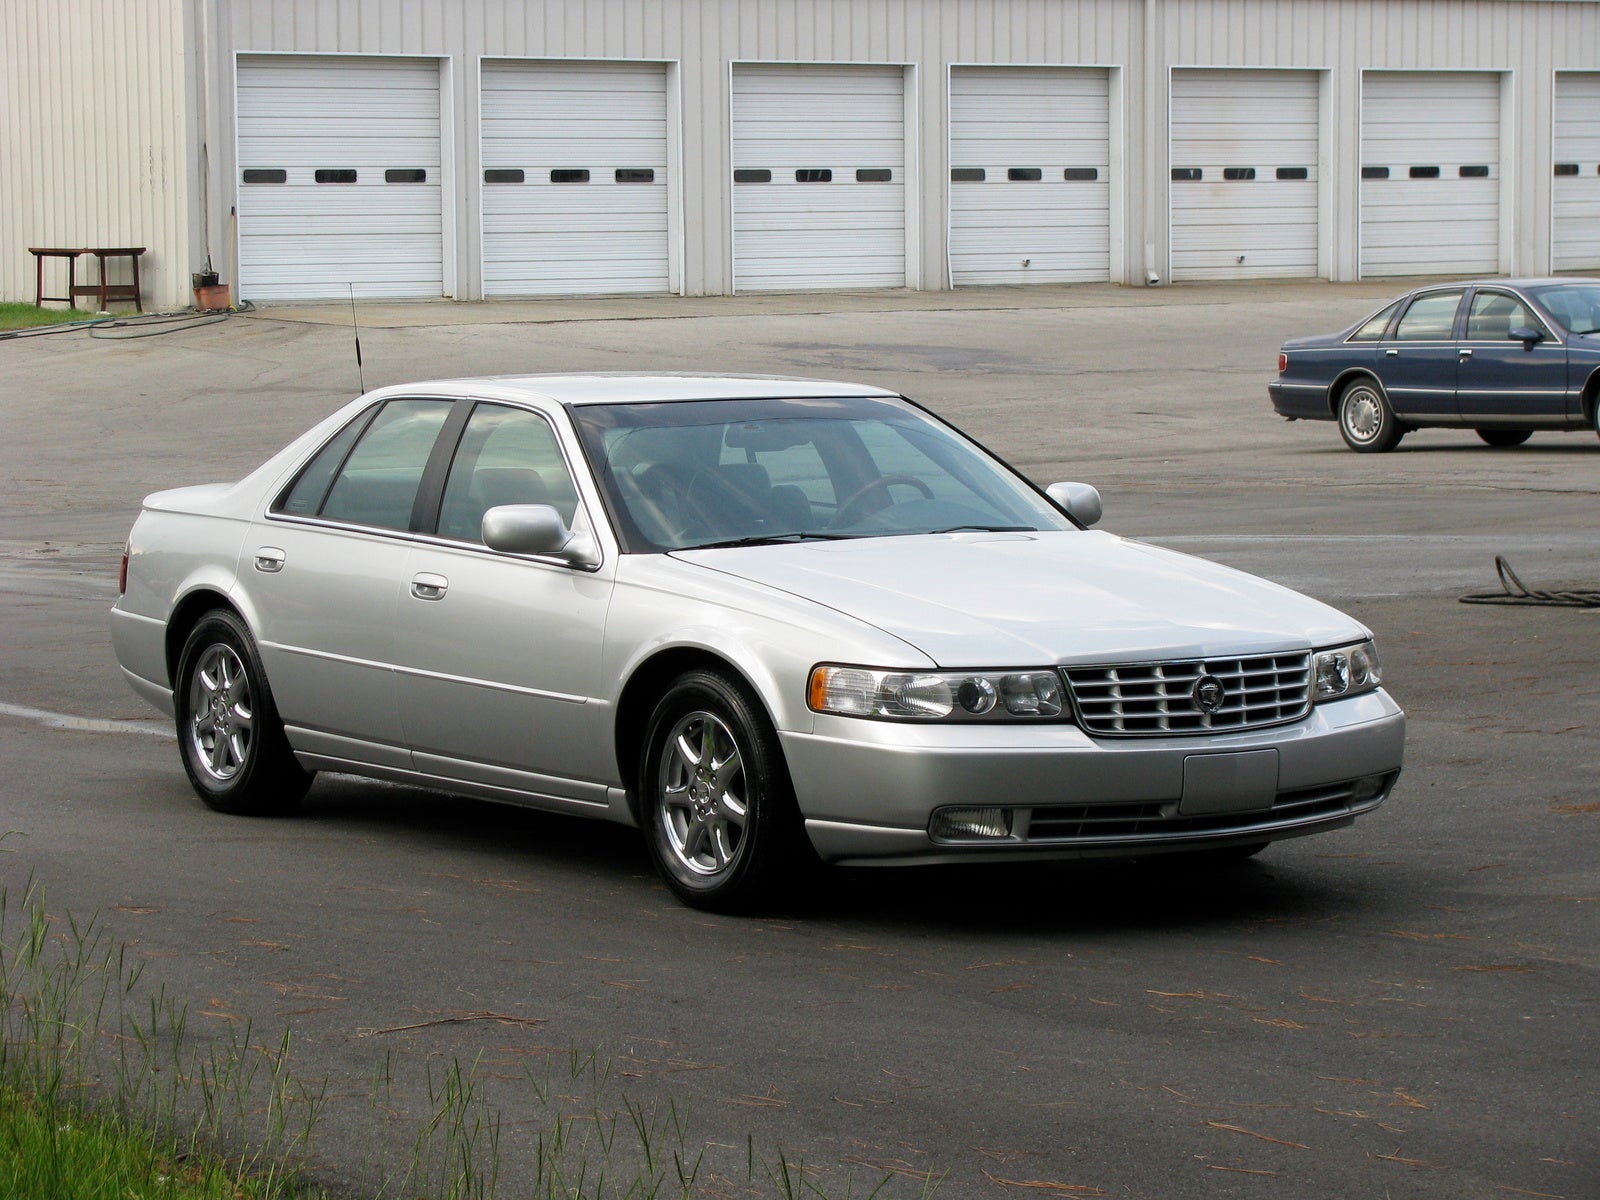  Cadillac  on 2000 Cadillac Seville   Pictures   2000 Cadillac Seville Sts Pict